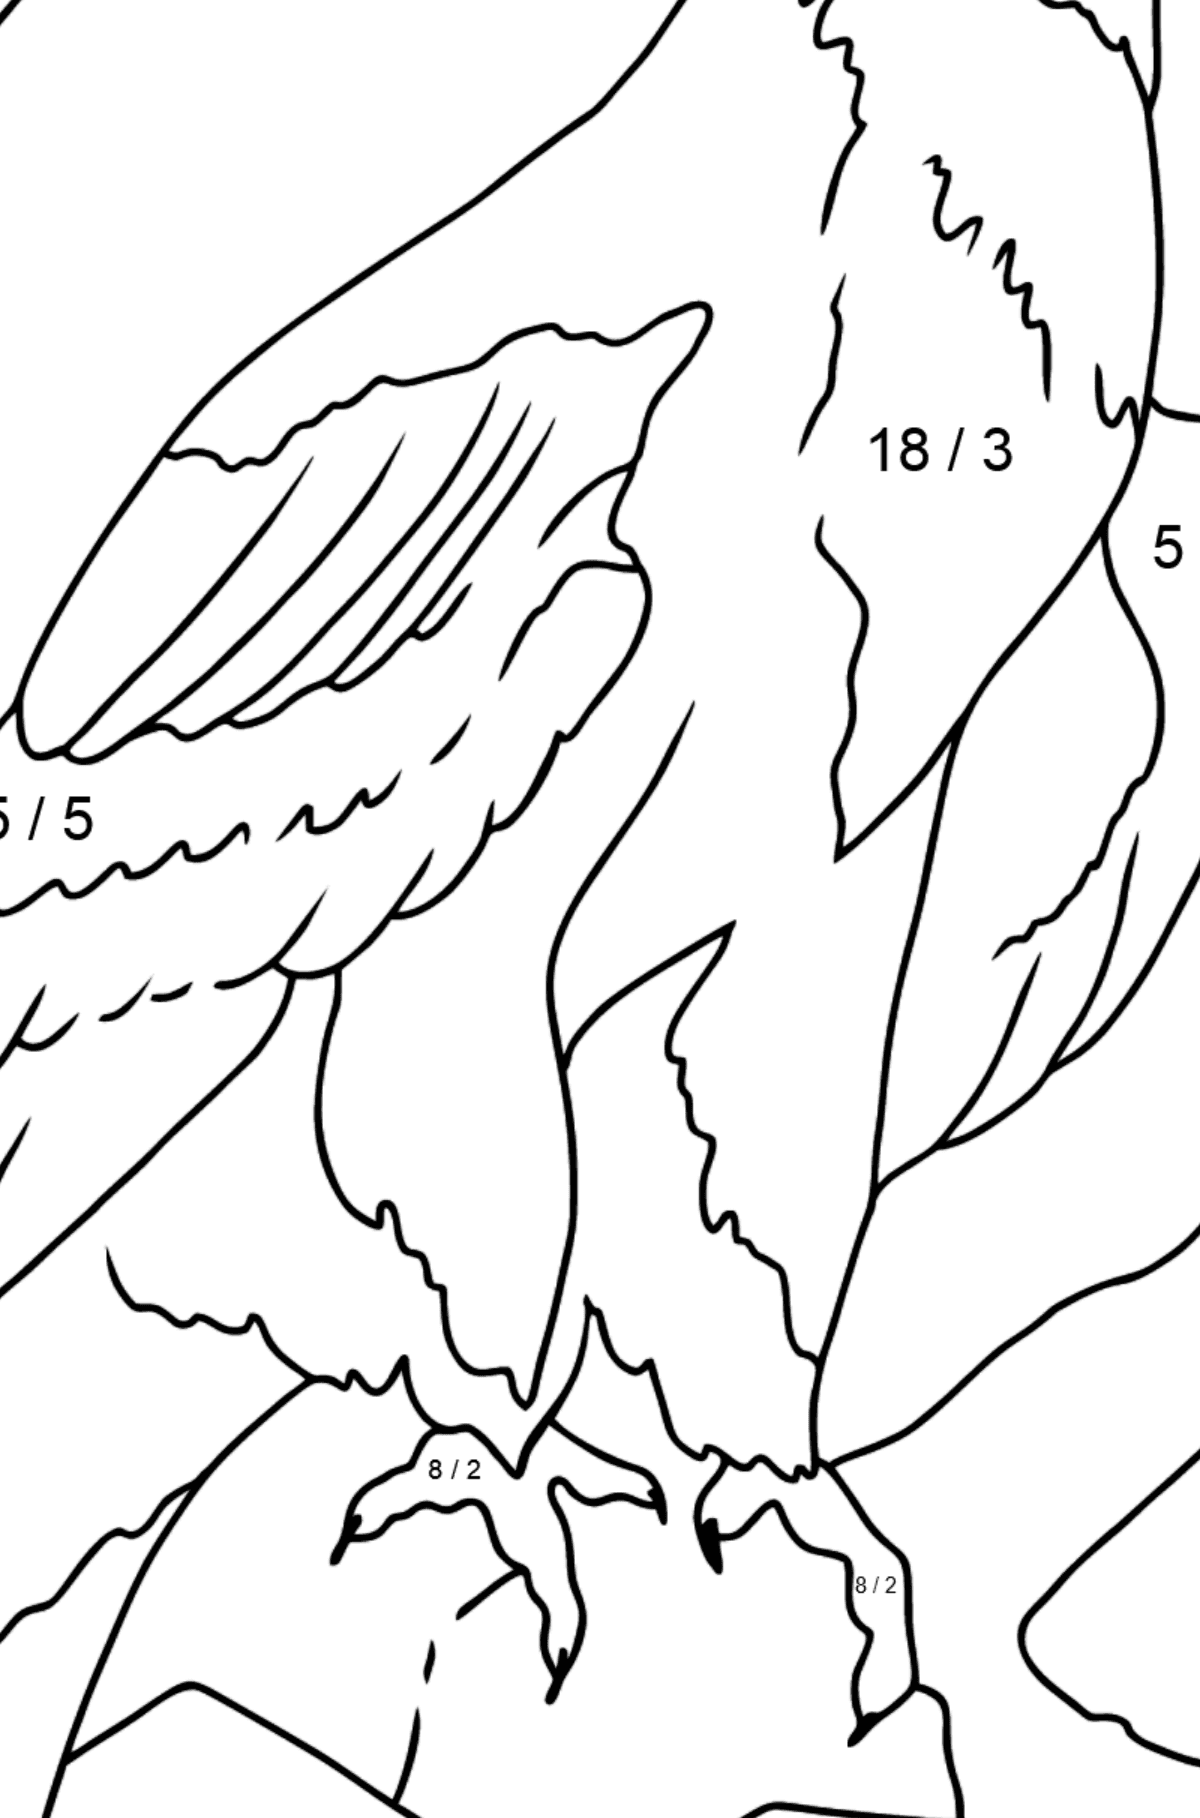 Coloring Page - An Eagle is on the Hunt - Math Coloring - Division for Kids